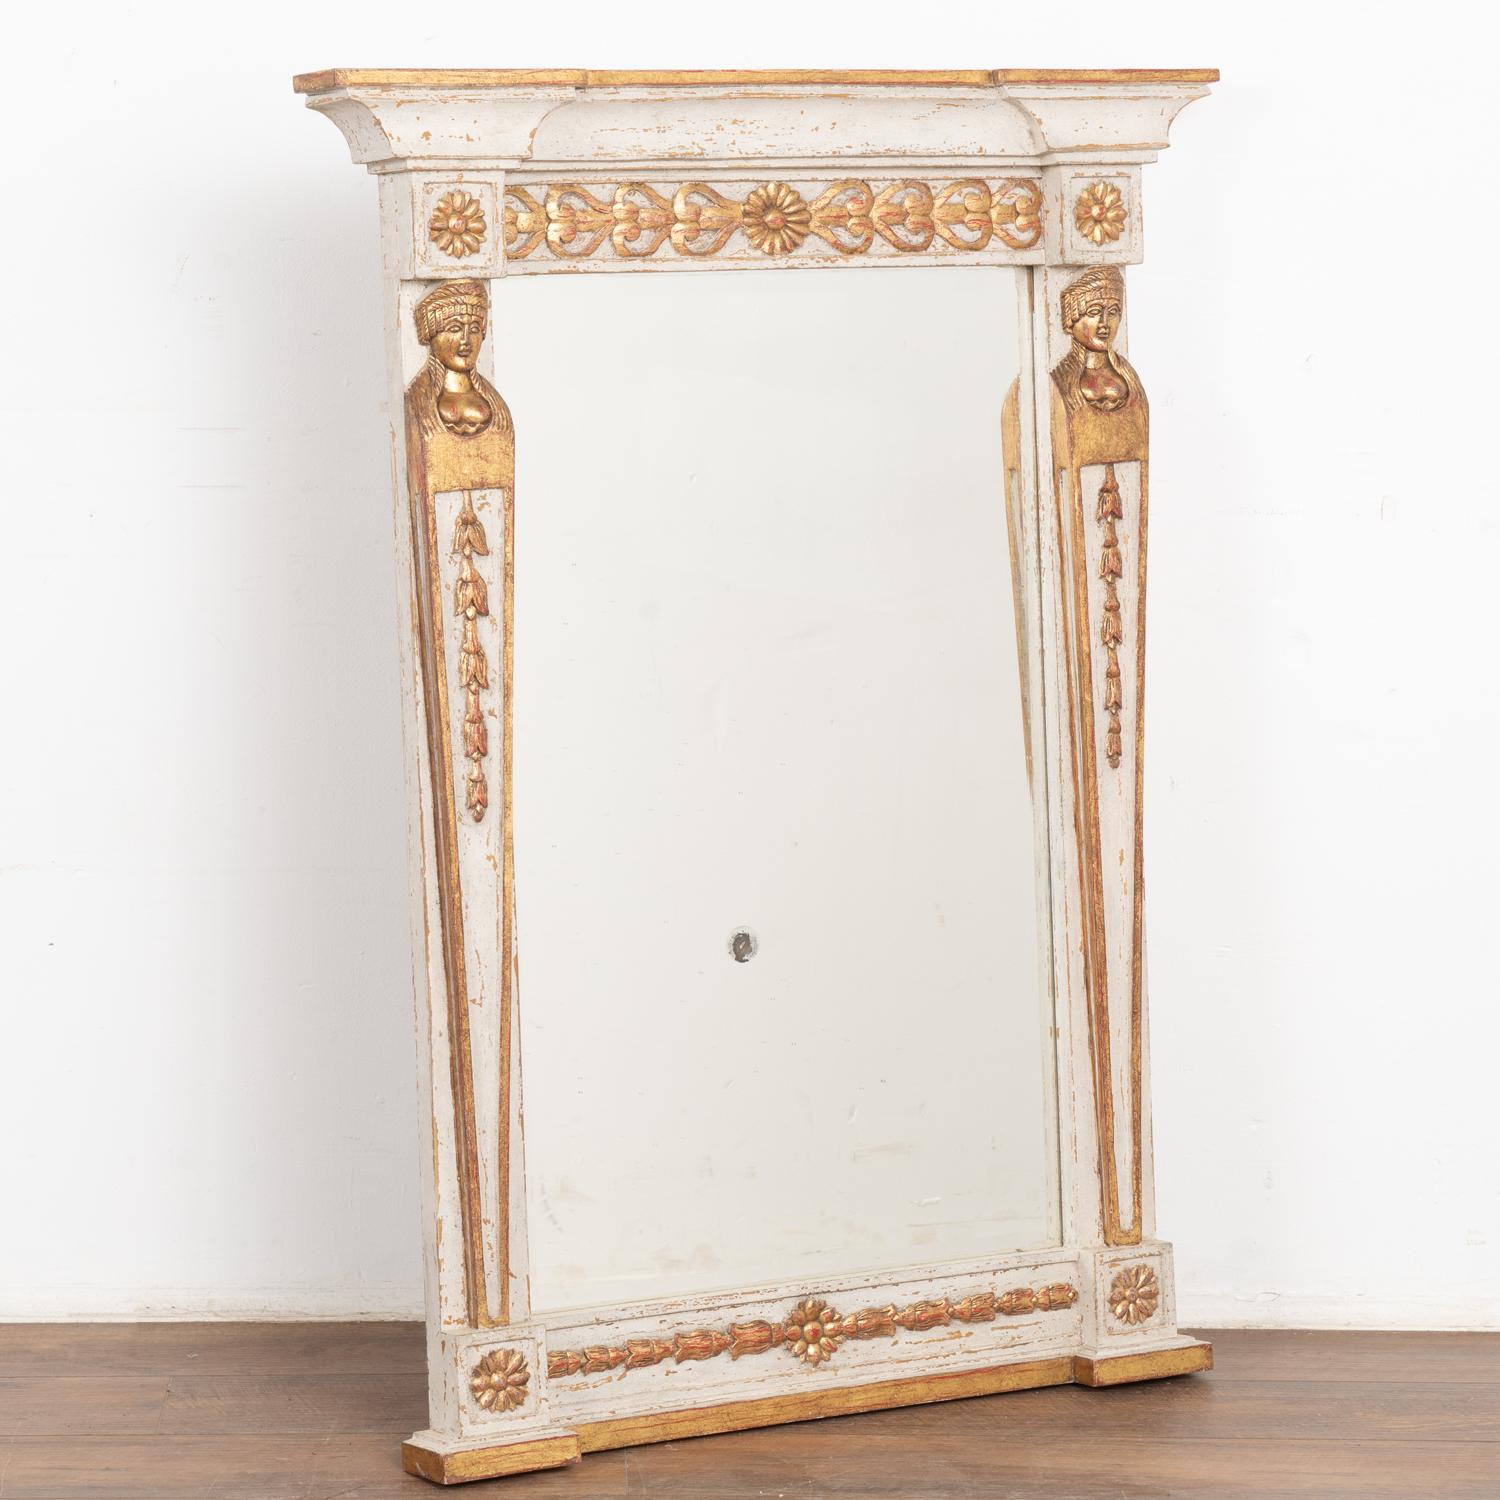 Lovely Gustavian style mirror with light gray painted finish with white undertones. Carved accents in gold gilt with red undertones.
At just under 4' tall, its size allows it to be displayed in a wide variety of spaces.
Strong, stable and ready to